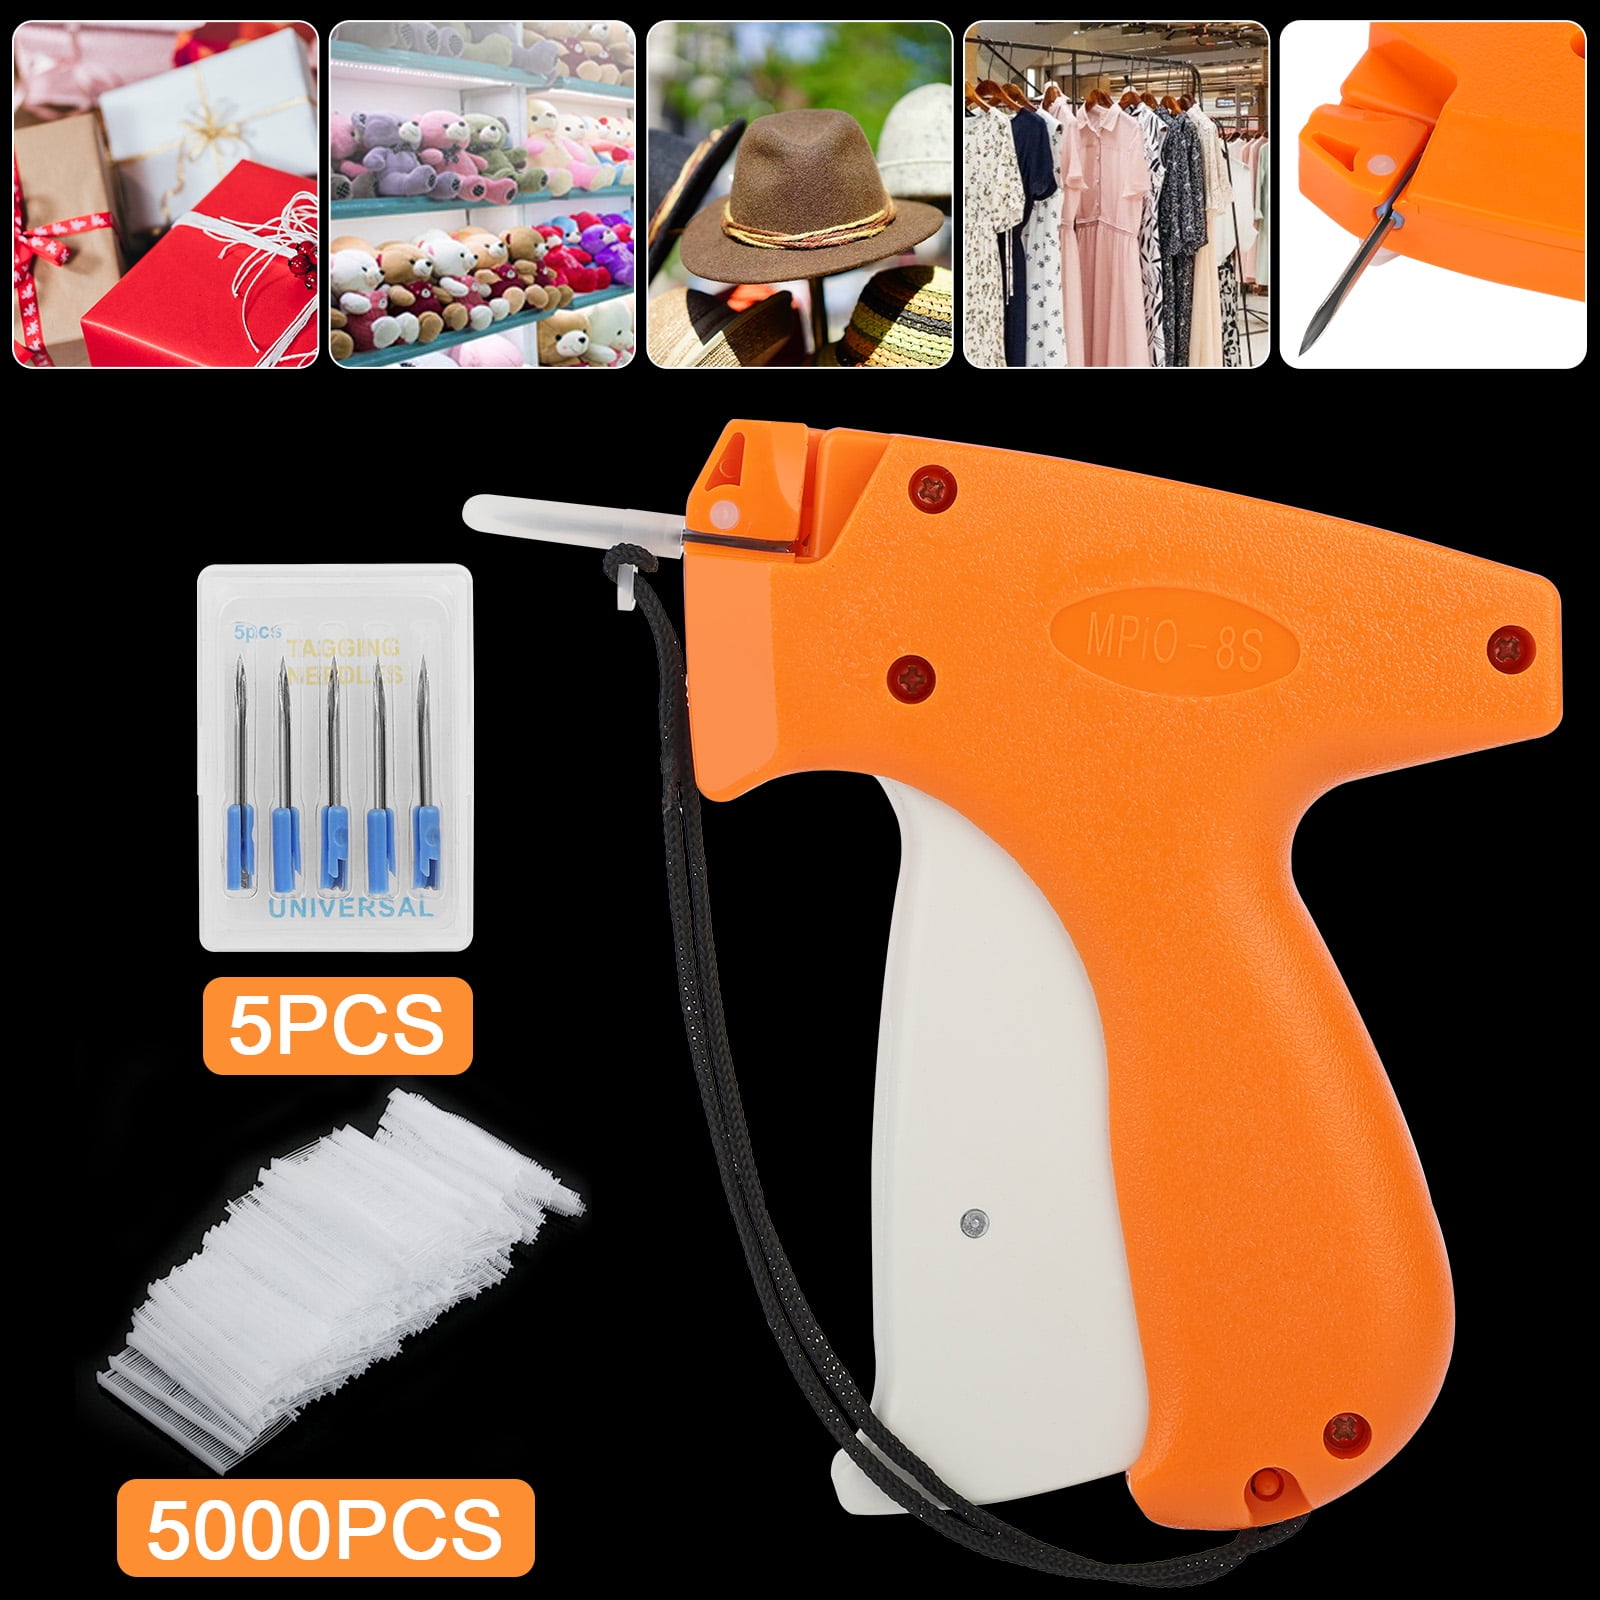 Amram Comfort Grip Tagging Gun for Clothing with 1250 Pieces of 2